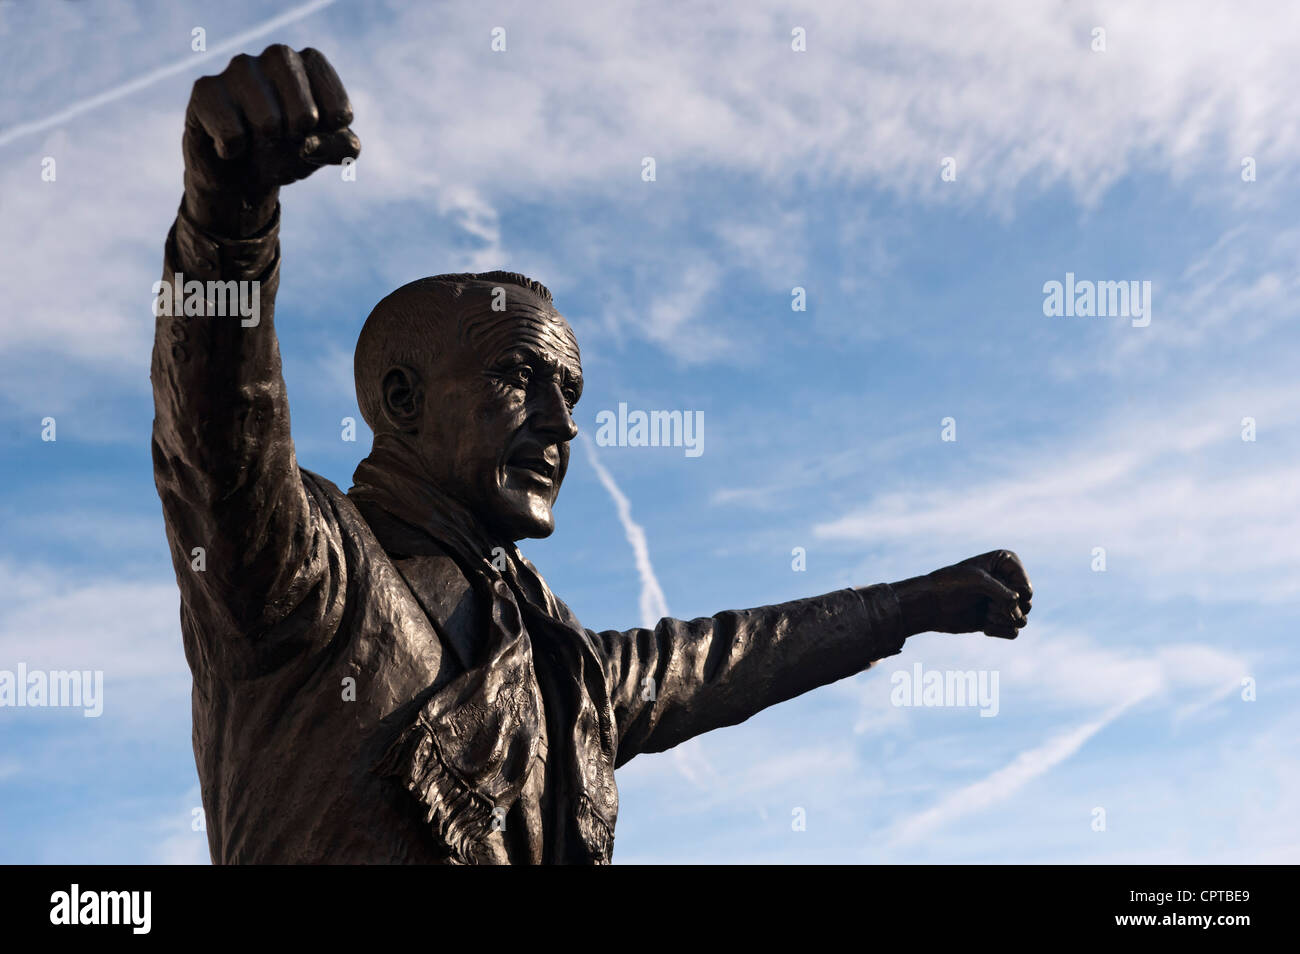 Statue of Bill Shankly, Liverpool Football Club manager 1959-1974 outside Anfield Stadium. Stock Photo